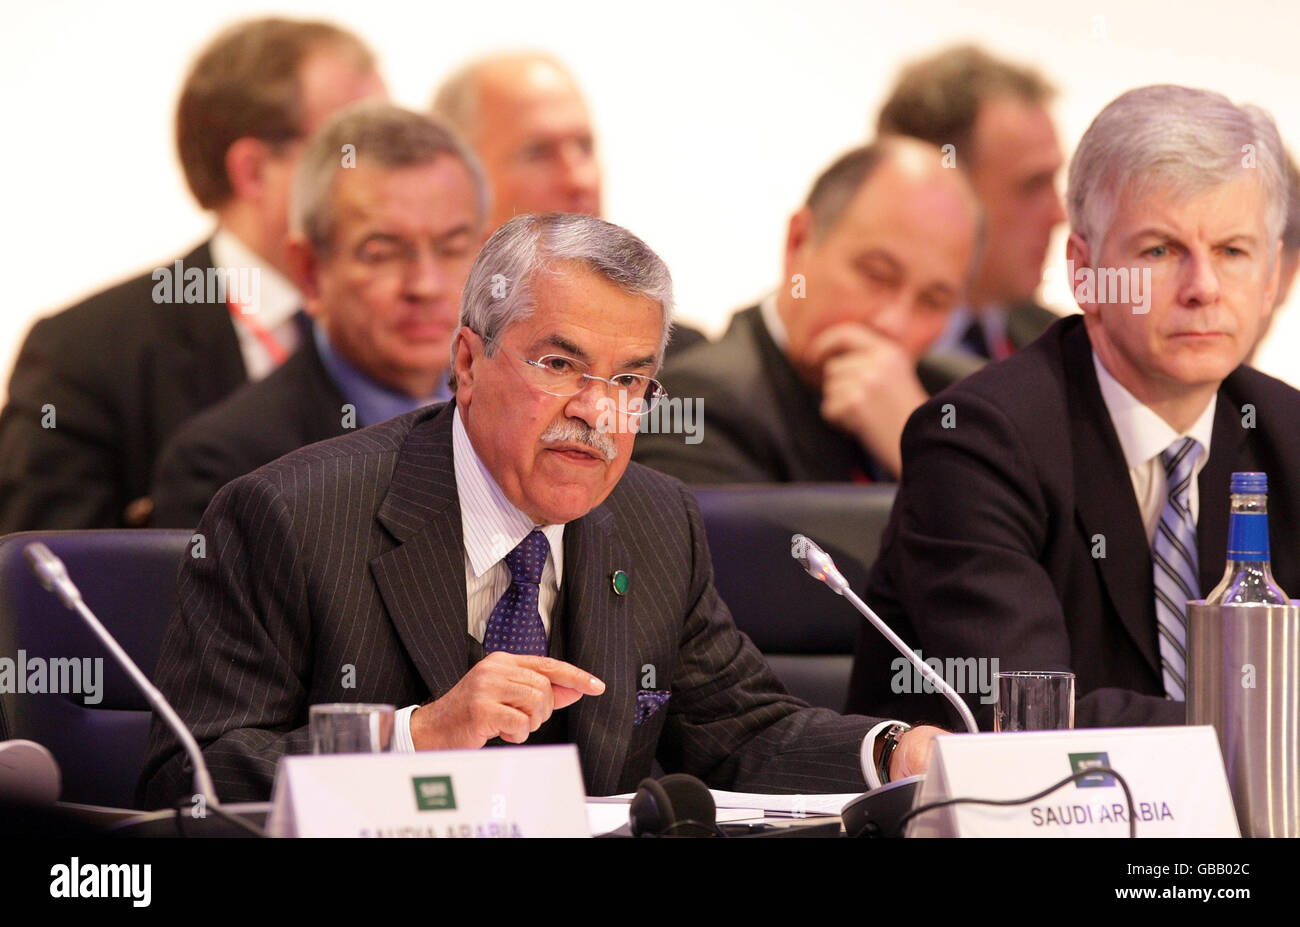 Ali I Naimi (left), the Saudi Arabia Minister of Petroleum and Mineral Resources, speaks at the 'London Energy Meeting' at the Intercontinental Hotel, London, where Prime Minister Gordon Brown delivered a stark warning that failure to tackle volatility in oil prices could cost the global economy trillions of dollars. Stock Photo